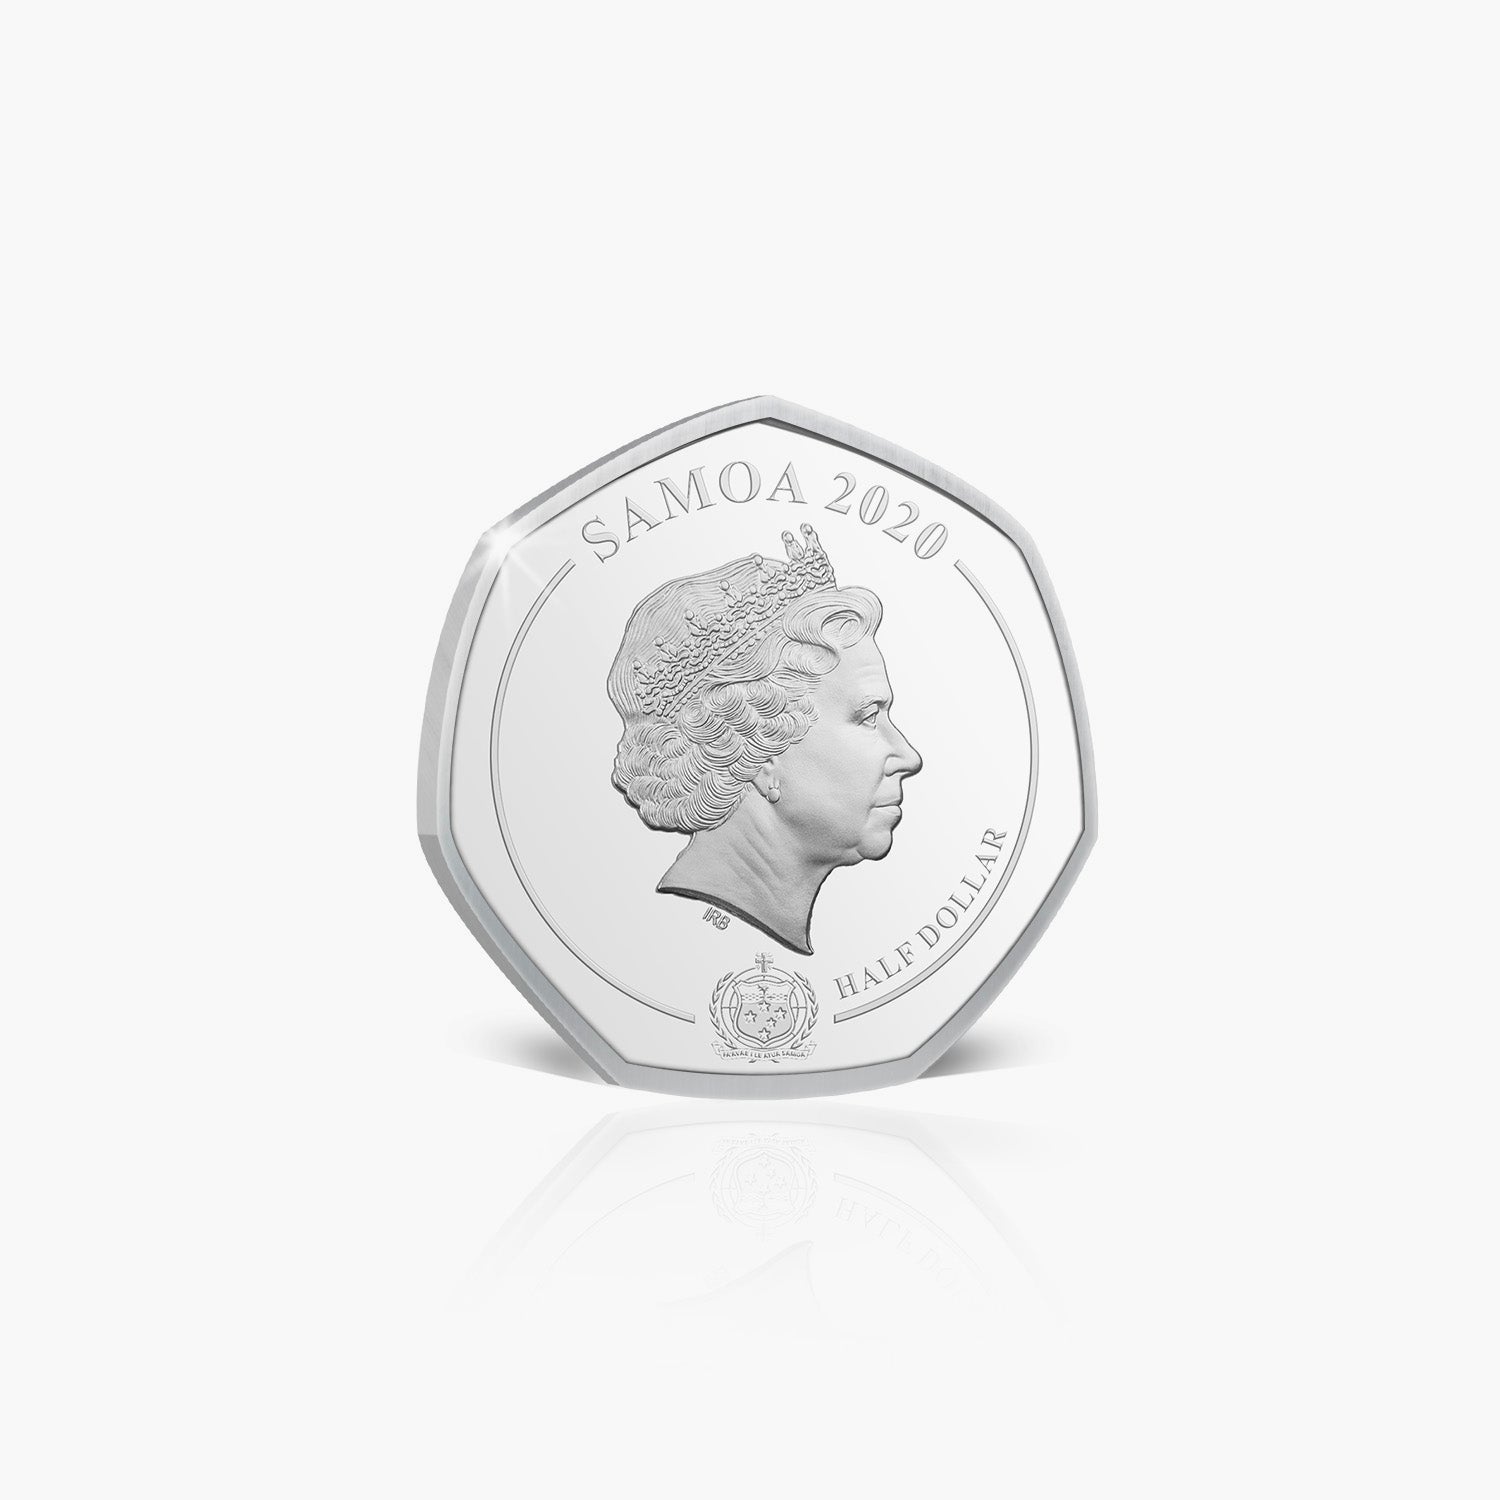 Refuse Collectors Silver Plated Coin